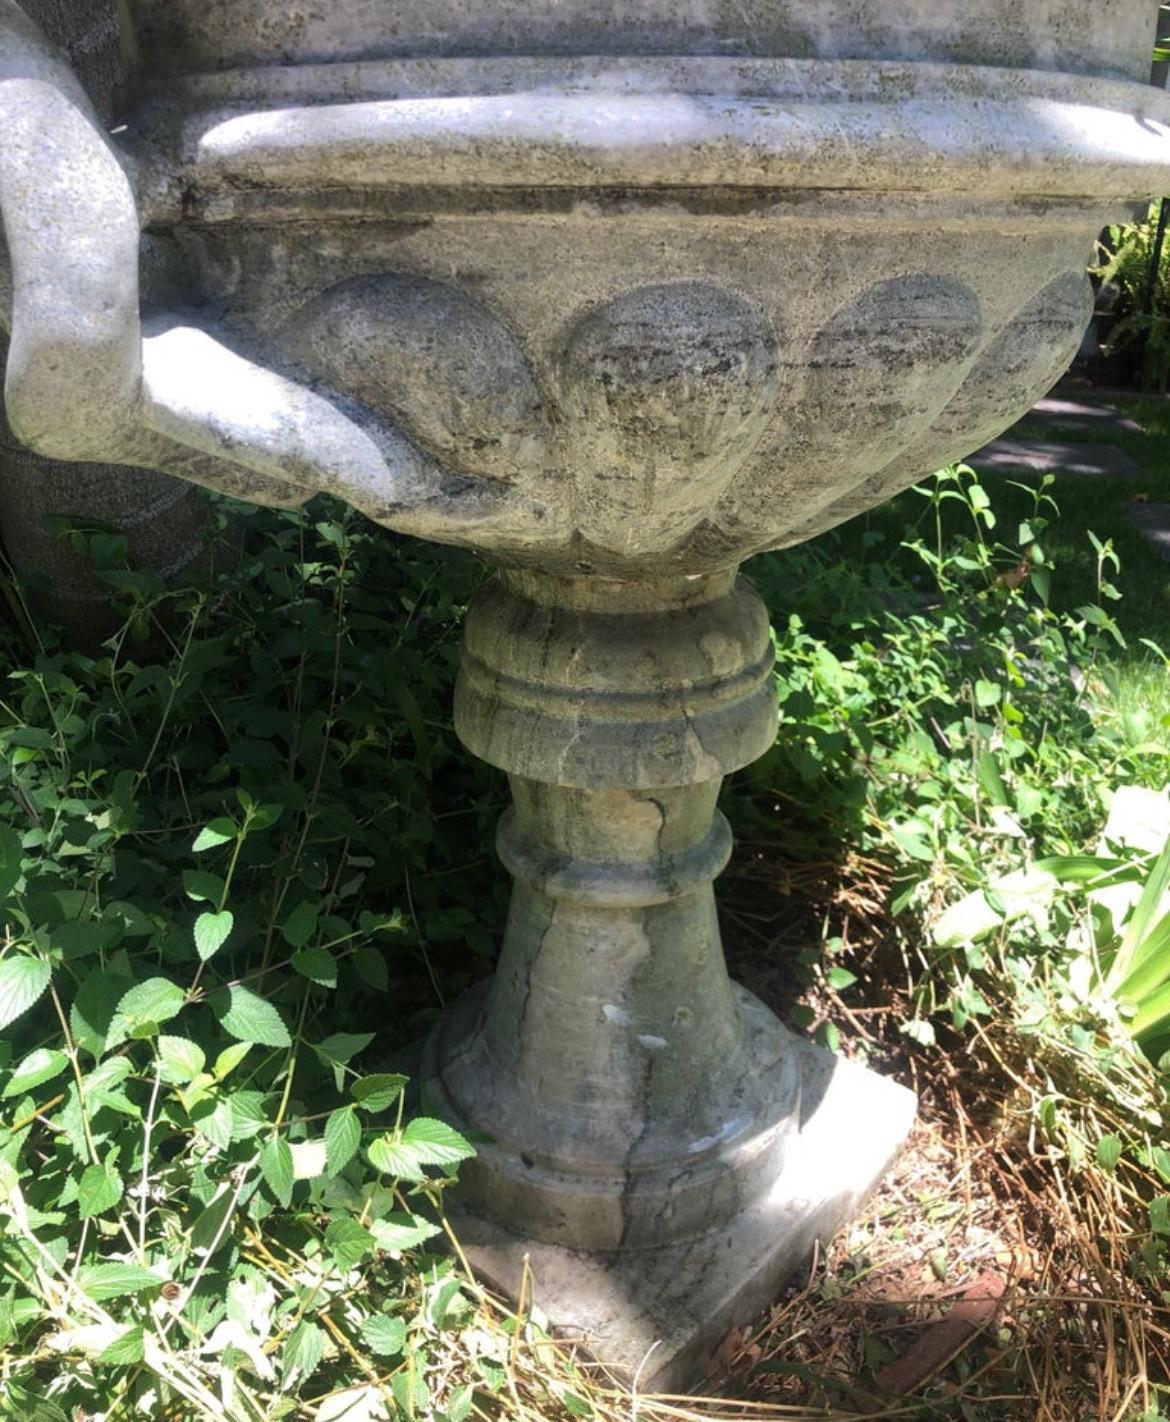 This is a one of a kinda eye catching planter.
Very large carved stone (possibly unpolished Cipollino Marble) Tazza Urn/Jardiniere. 
Top portion removable from pedestal. 
Handles are two twisted snakes/serpentine coils.

Substantial stoup